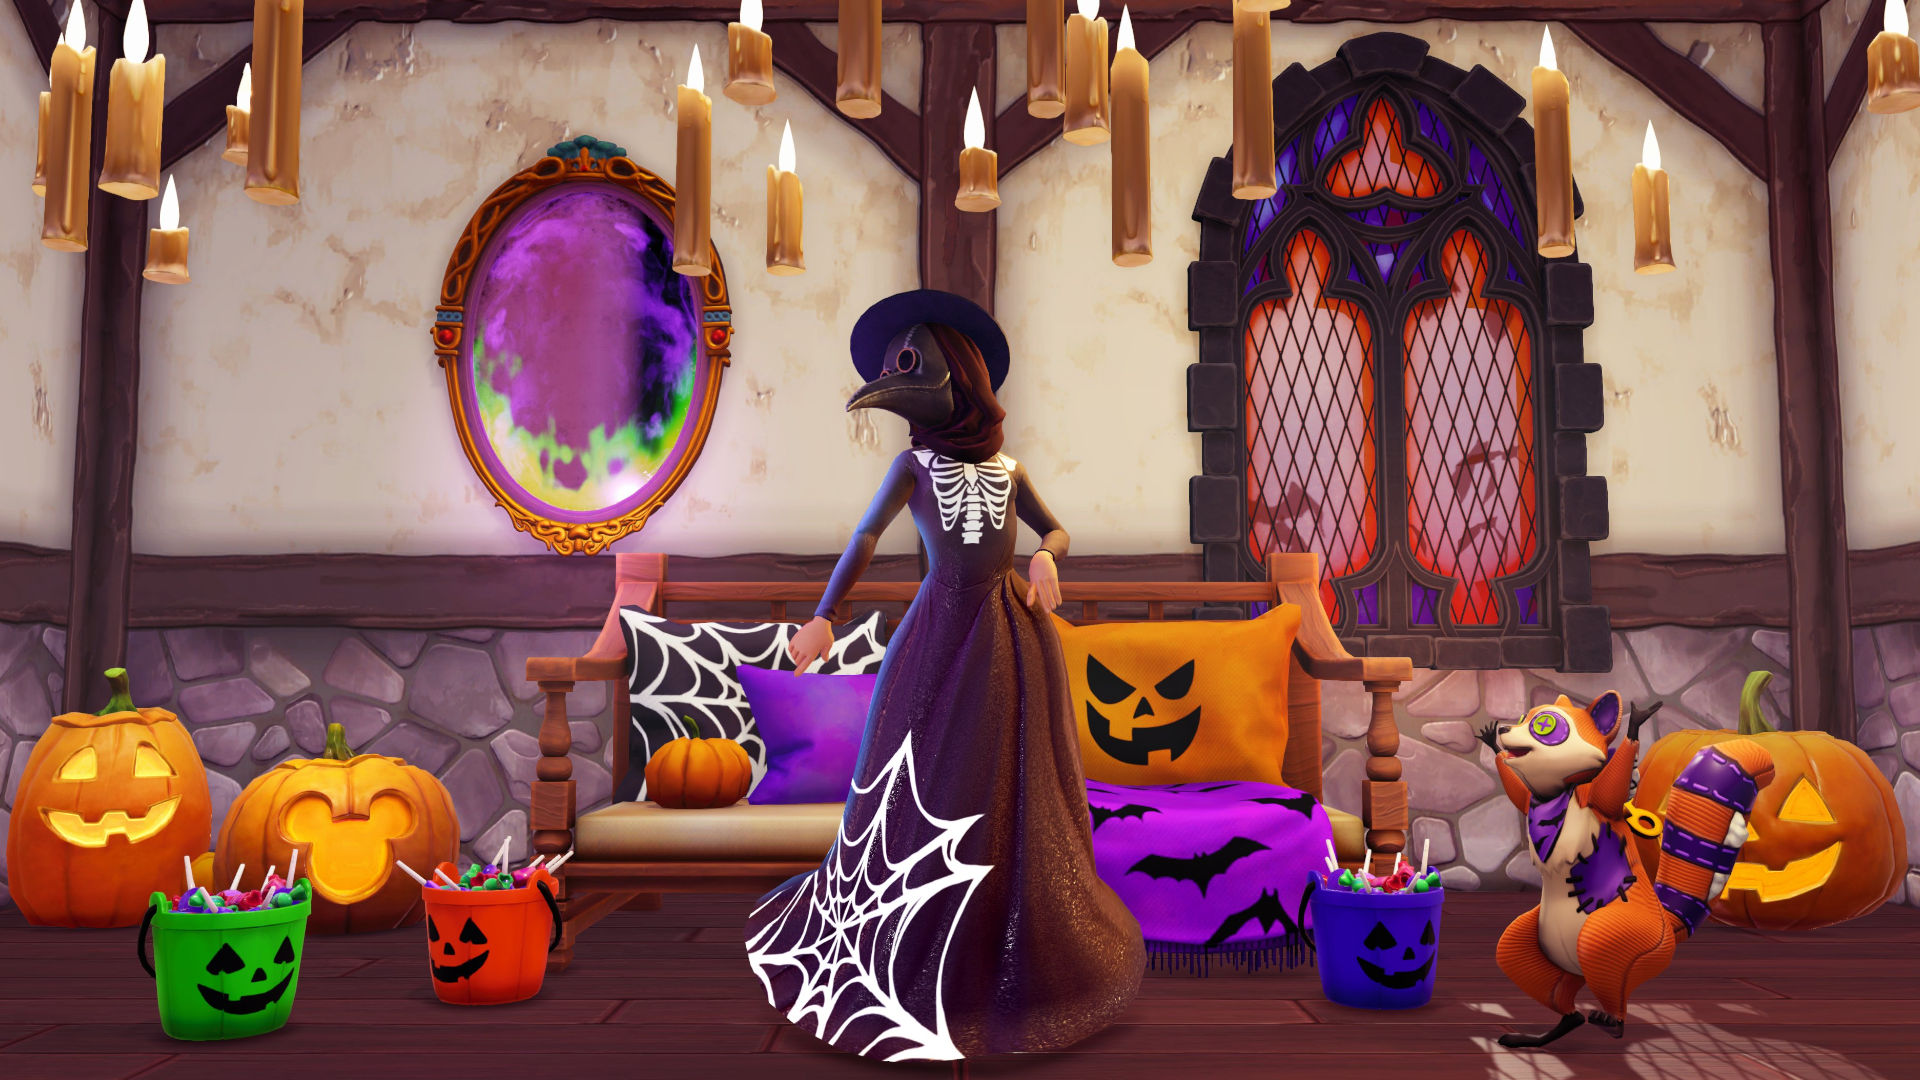 Get spooky with the Disney Dreamlight Valley Halloween decor